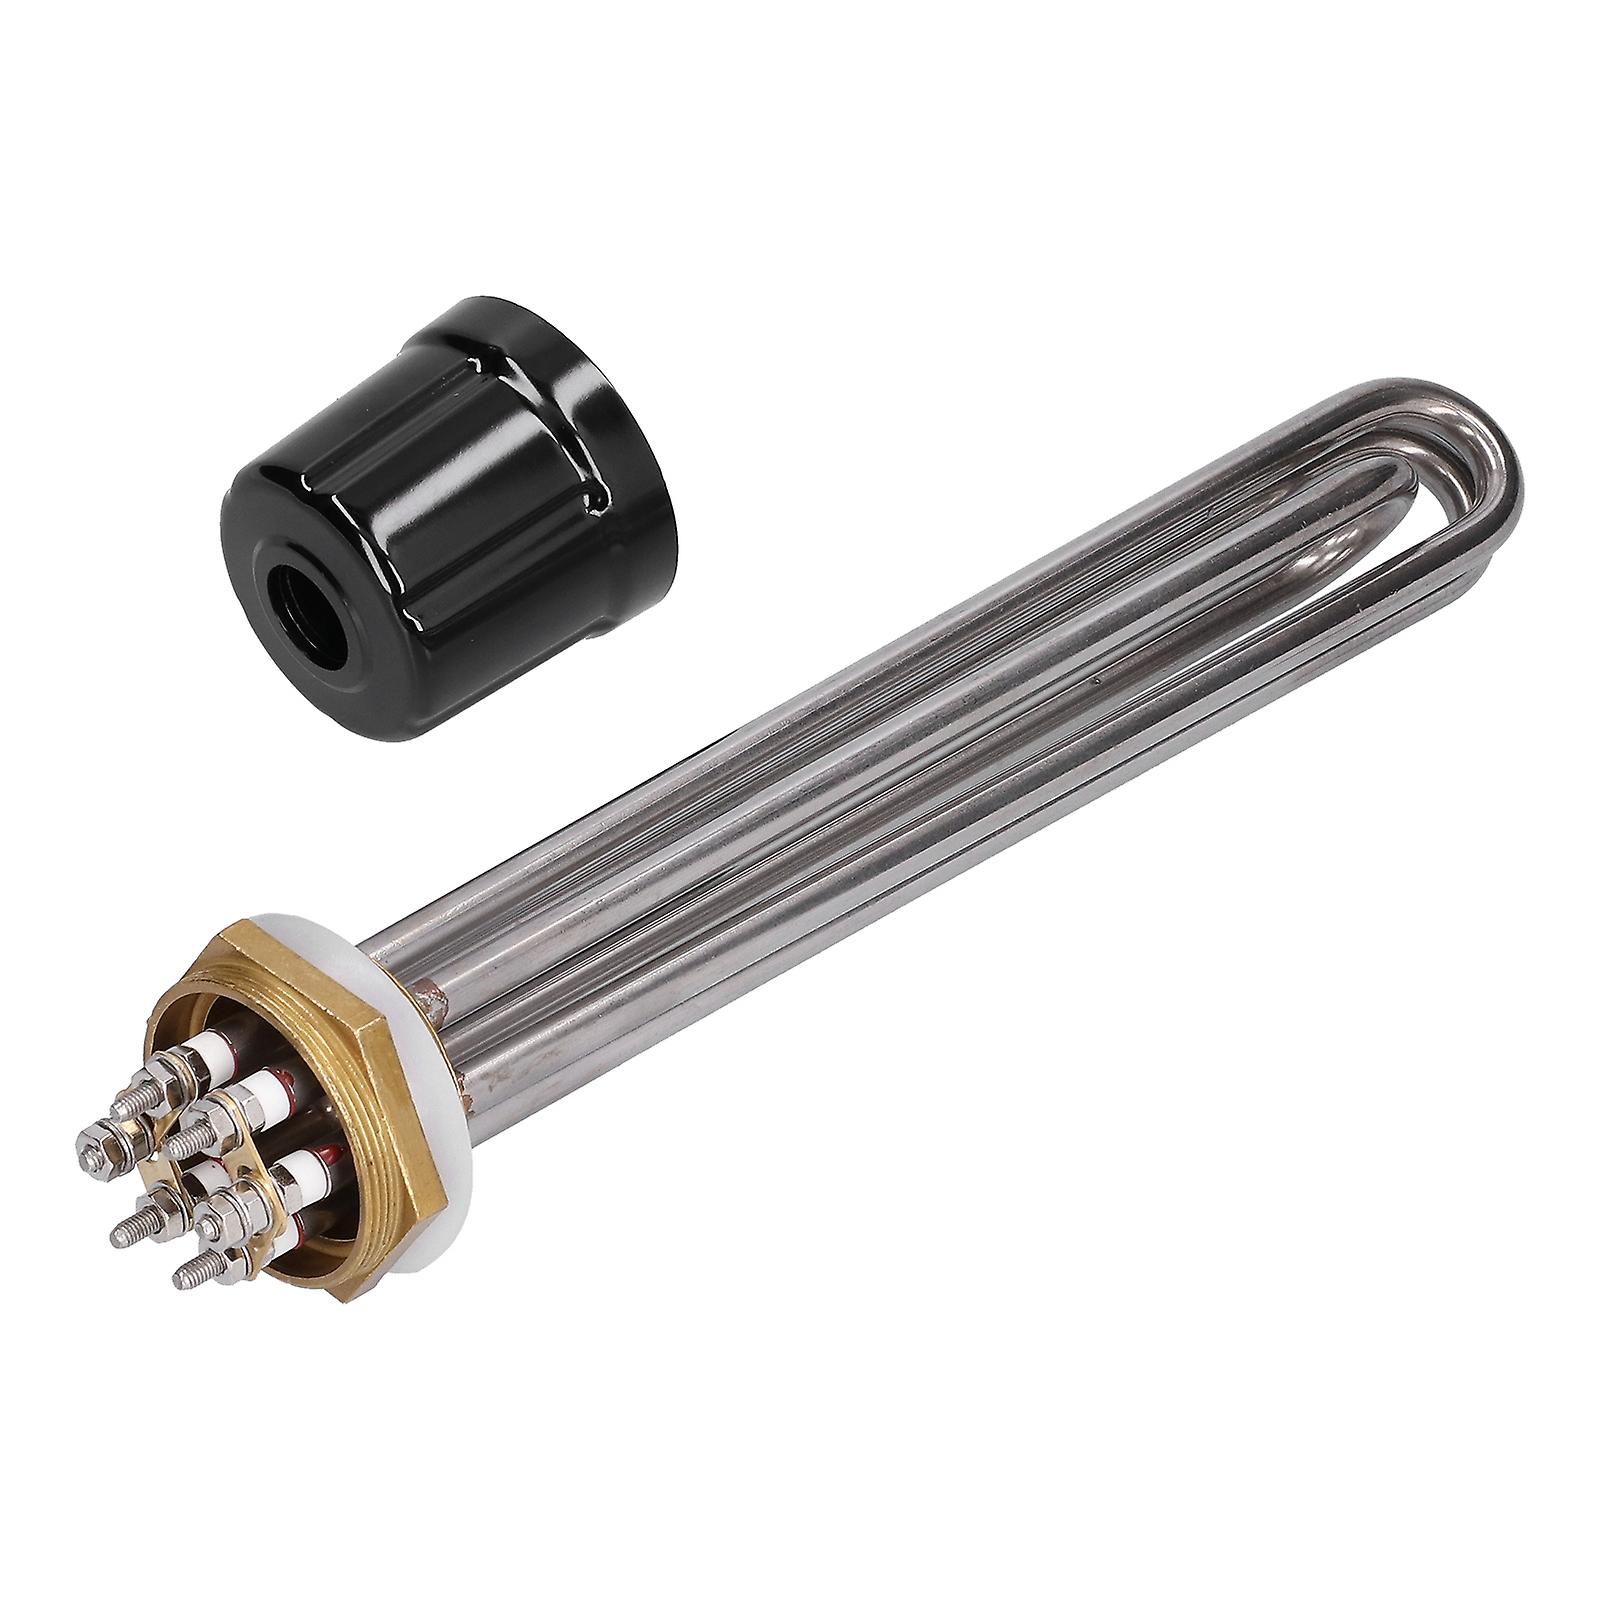 Heating Tube Electric Stainless Steel Rod Industrial Supplies Brass Thread Ac220/380v9kw 1.5in Bsp